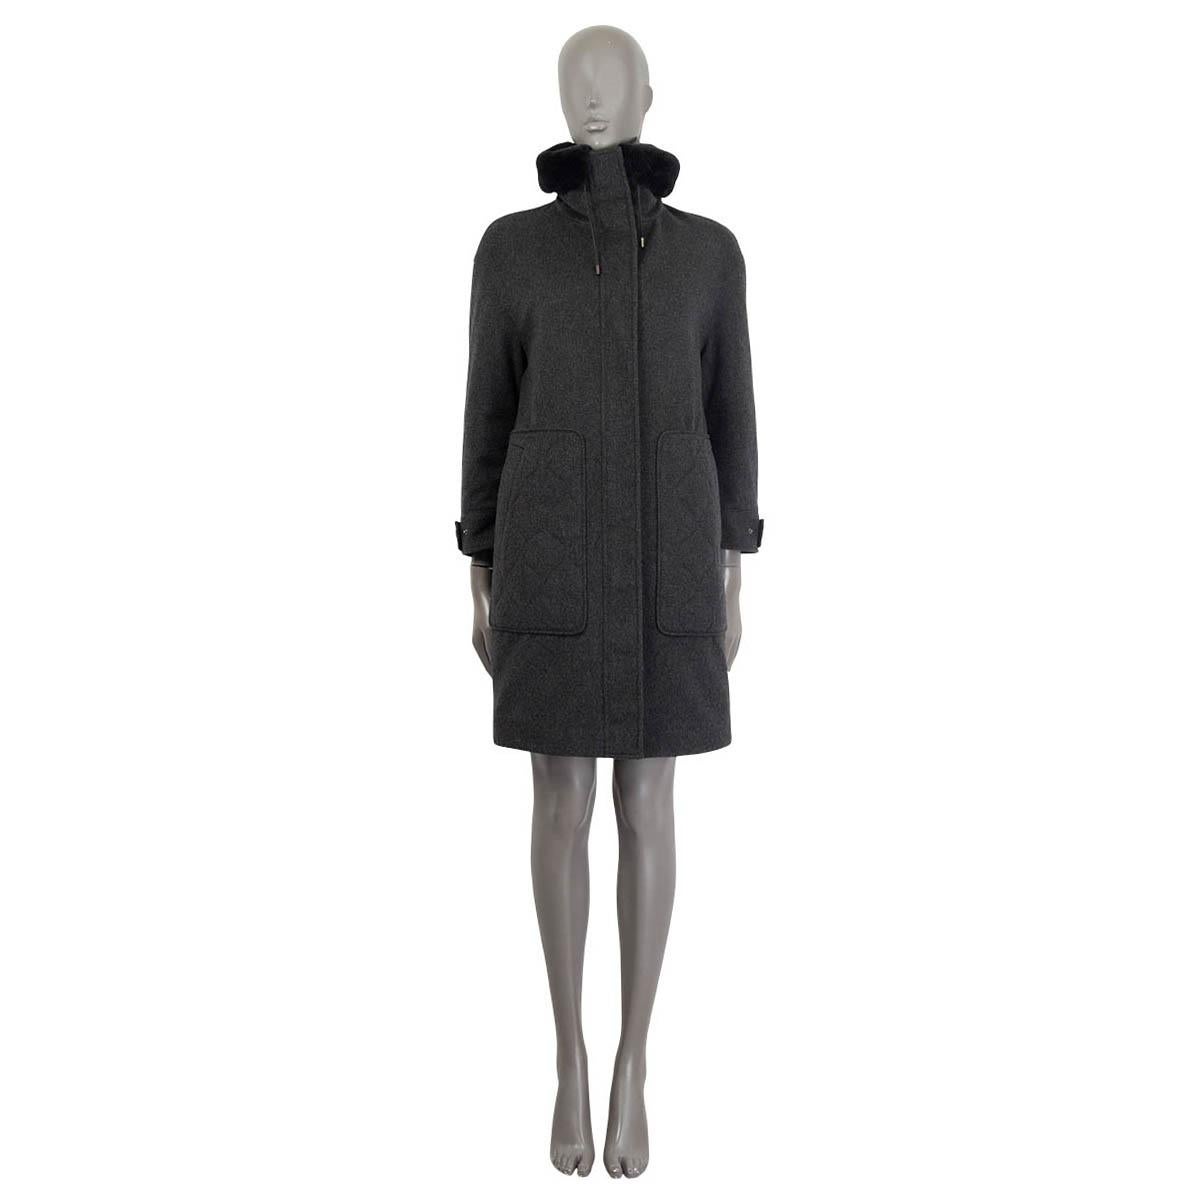 100% authentic Loro Piana storm system coat in charcoal cashmere (100%). Features a fur collar, buttoned cuffs and two slit pockets on the front. Opens with push buttons, a drawstring and a concealed zipper at the front. Lined in green nylon (100%).